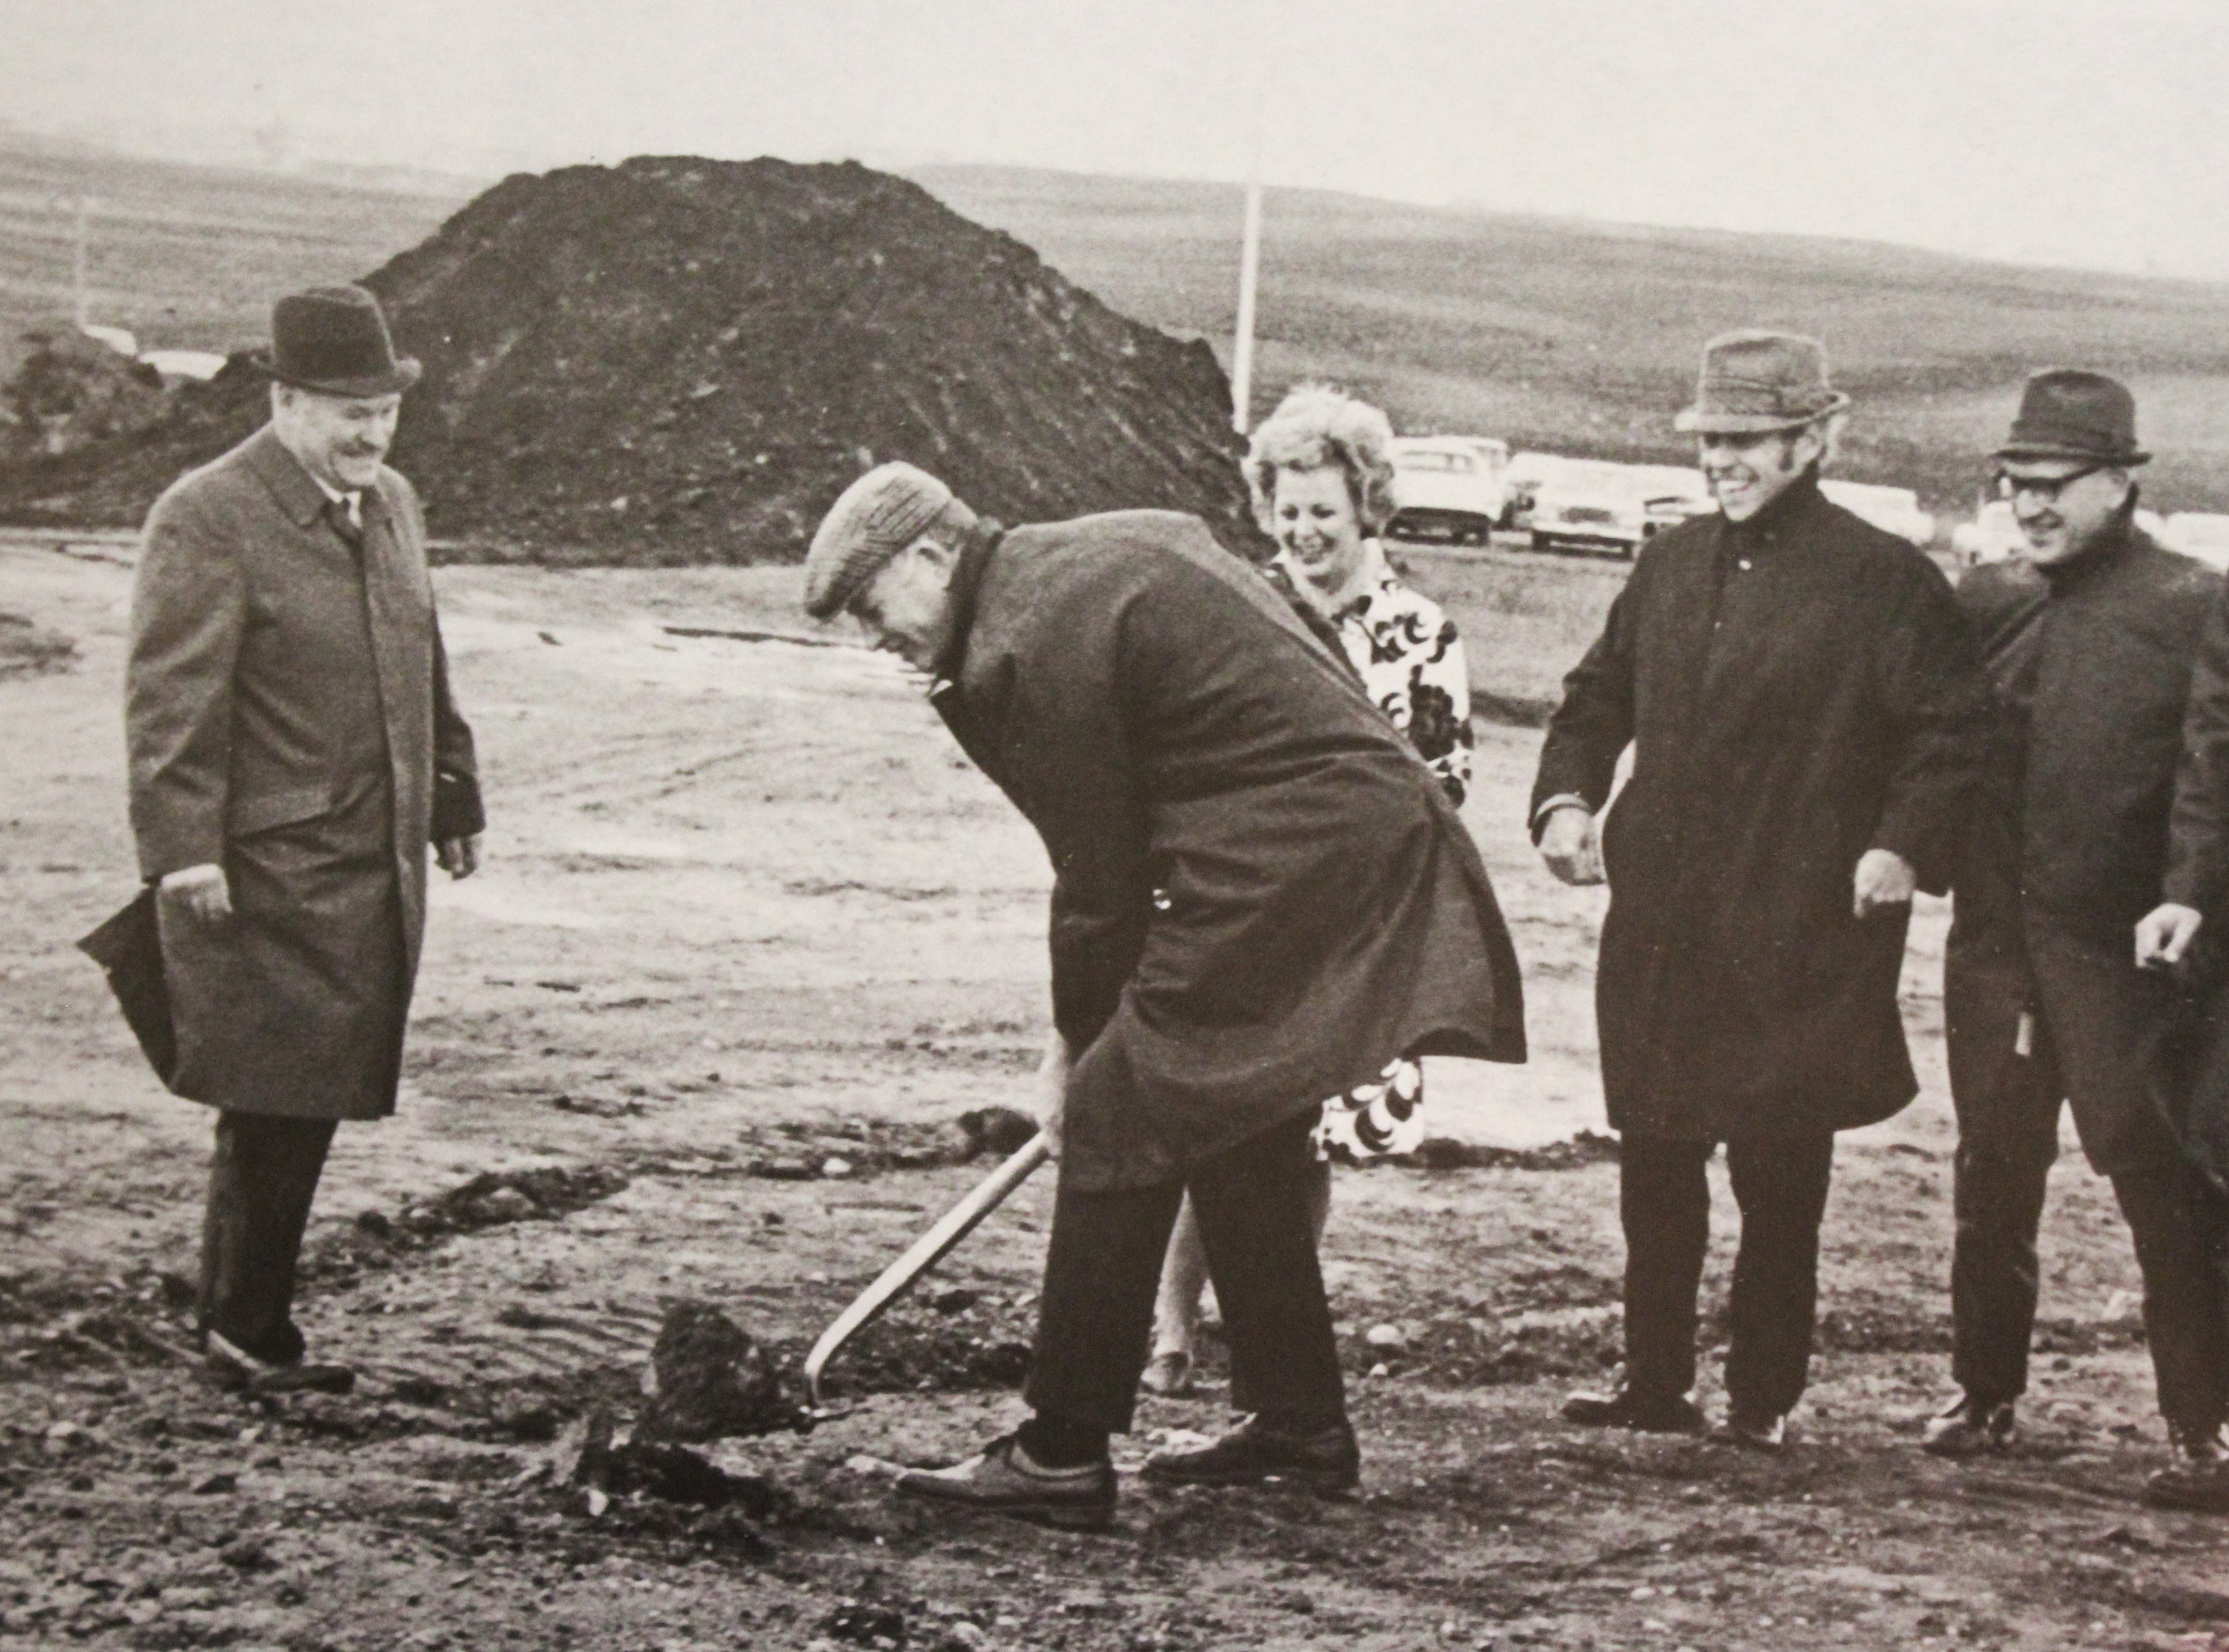 A groundbreaking ceremony at the Fergus Falls campus in 1970